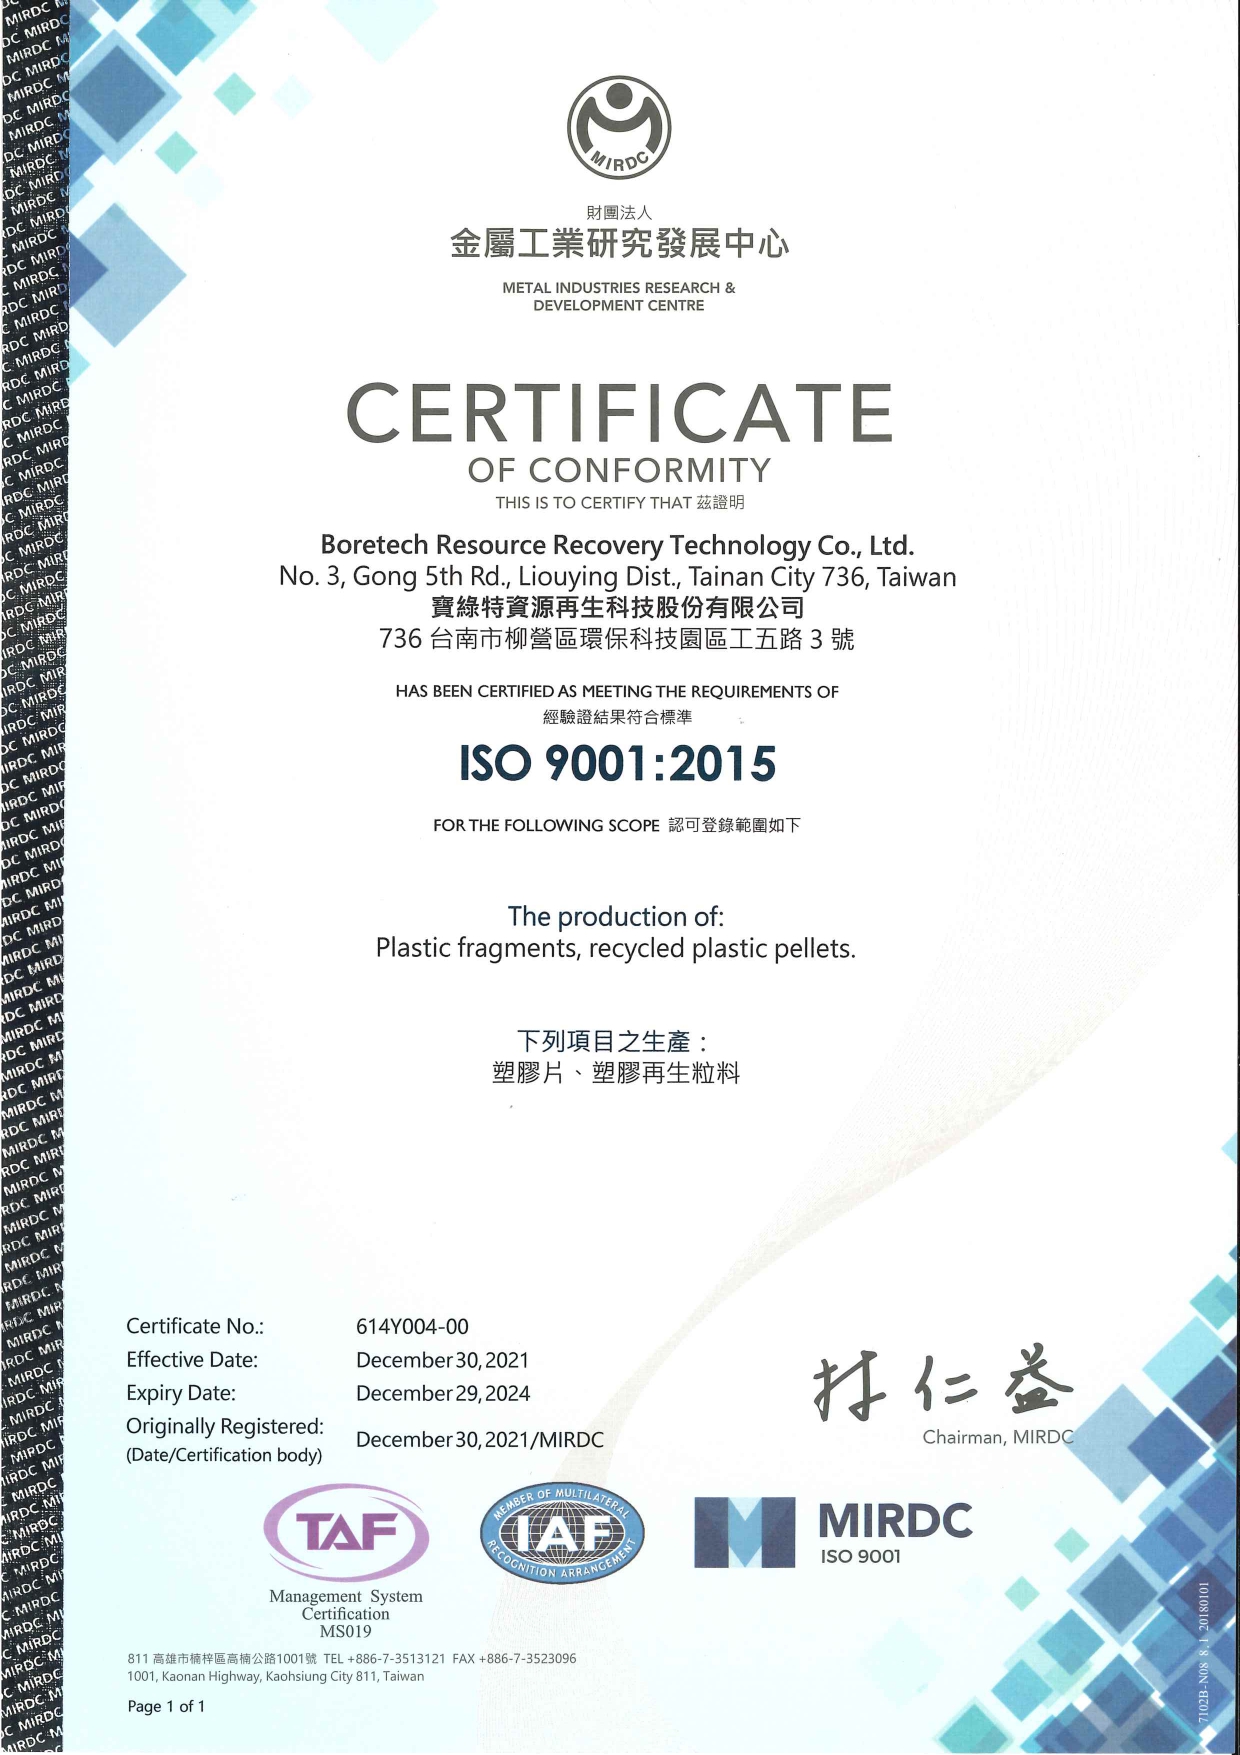 ISO9001：2015證書 1 page 0001